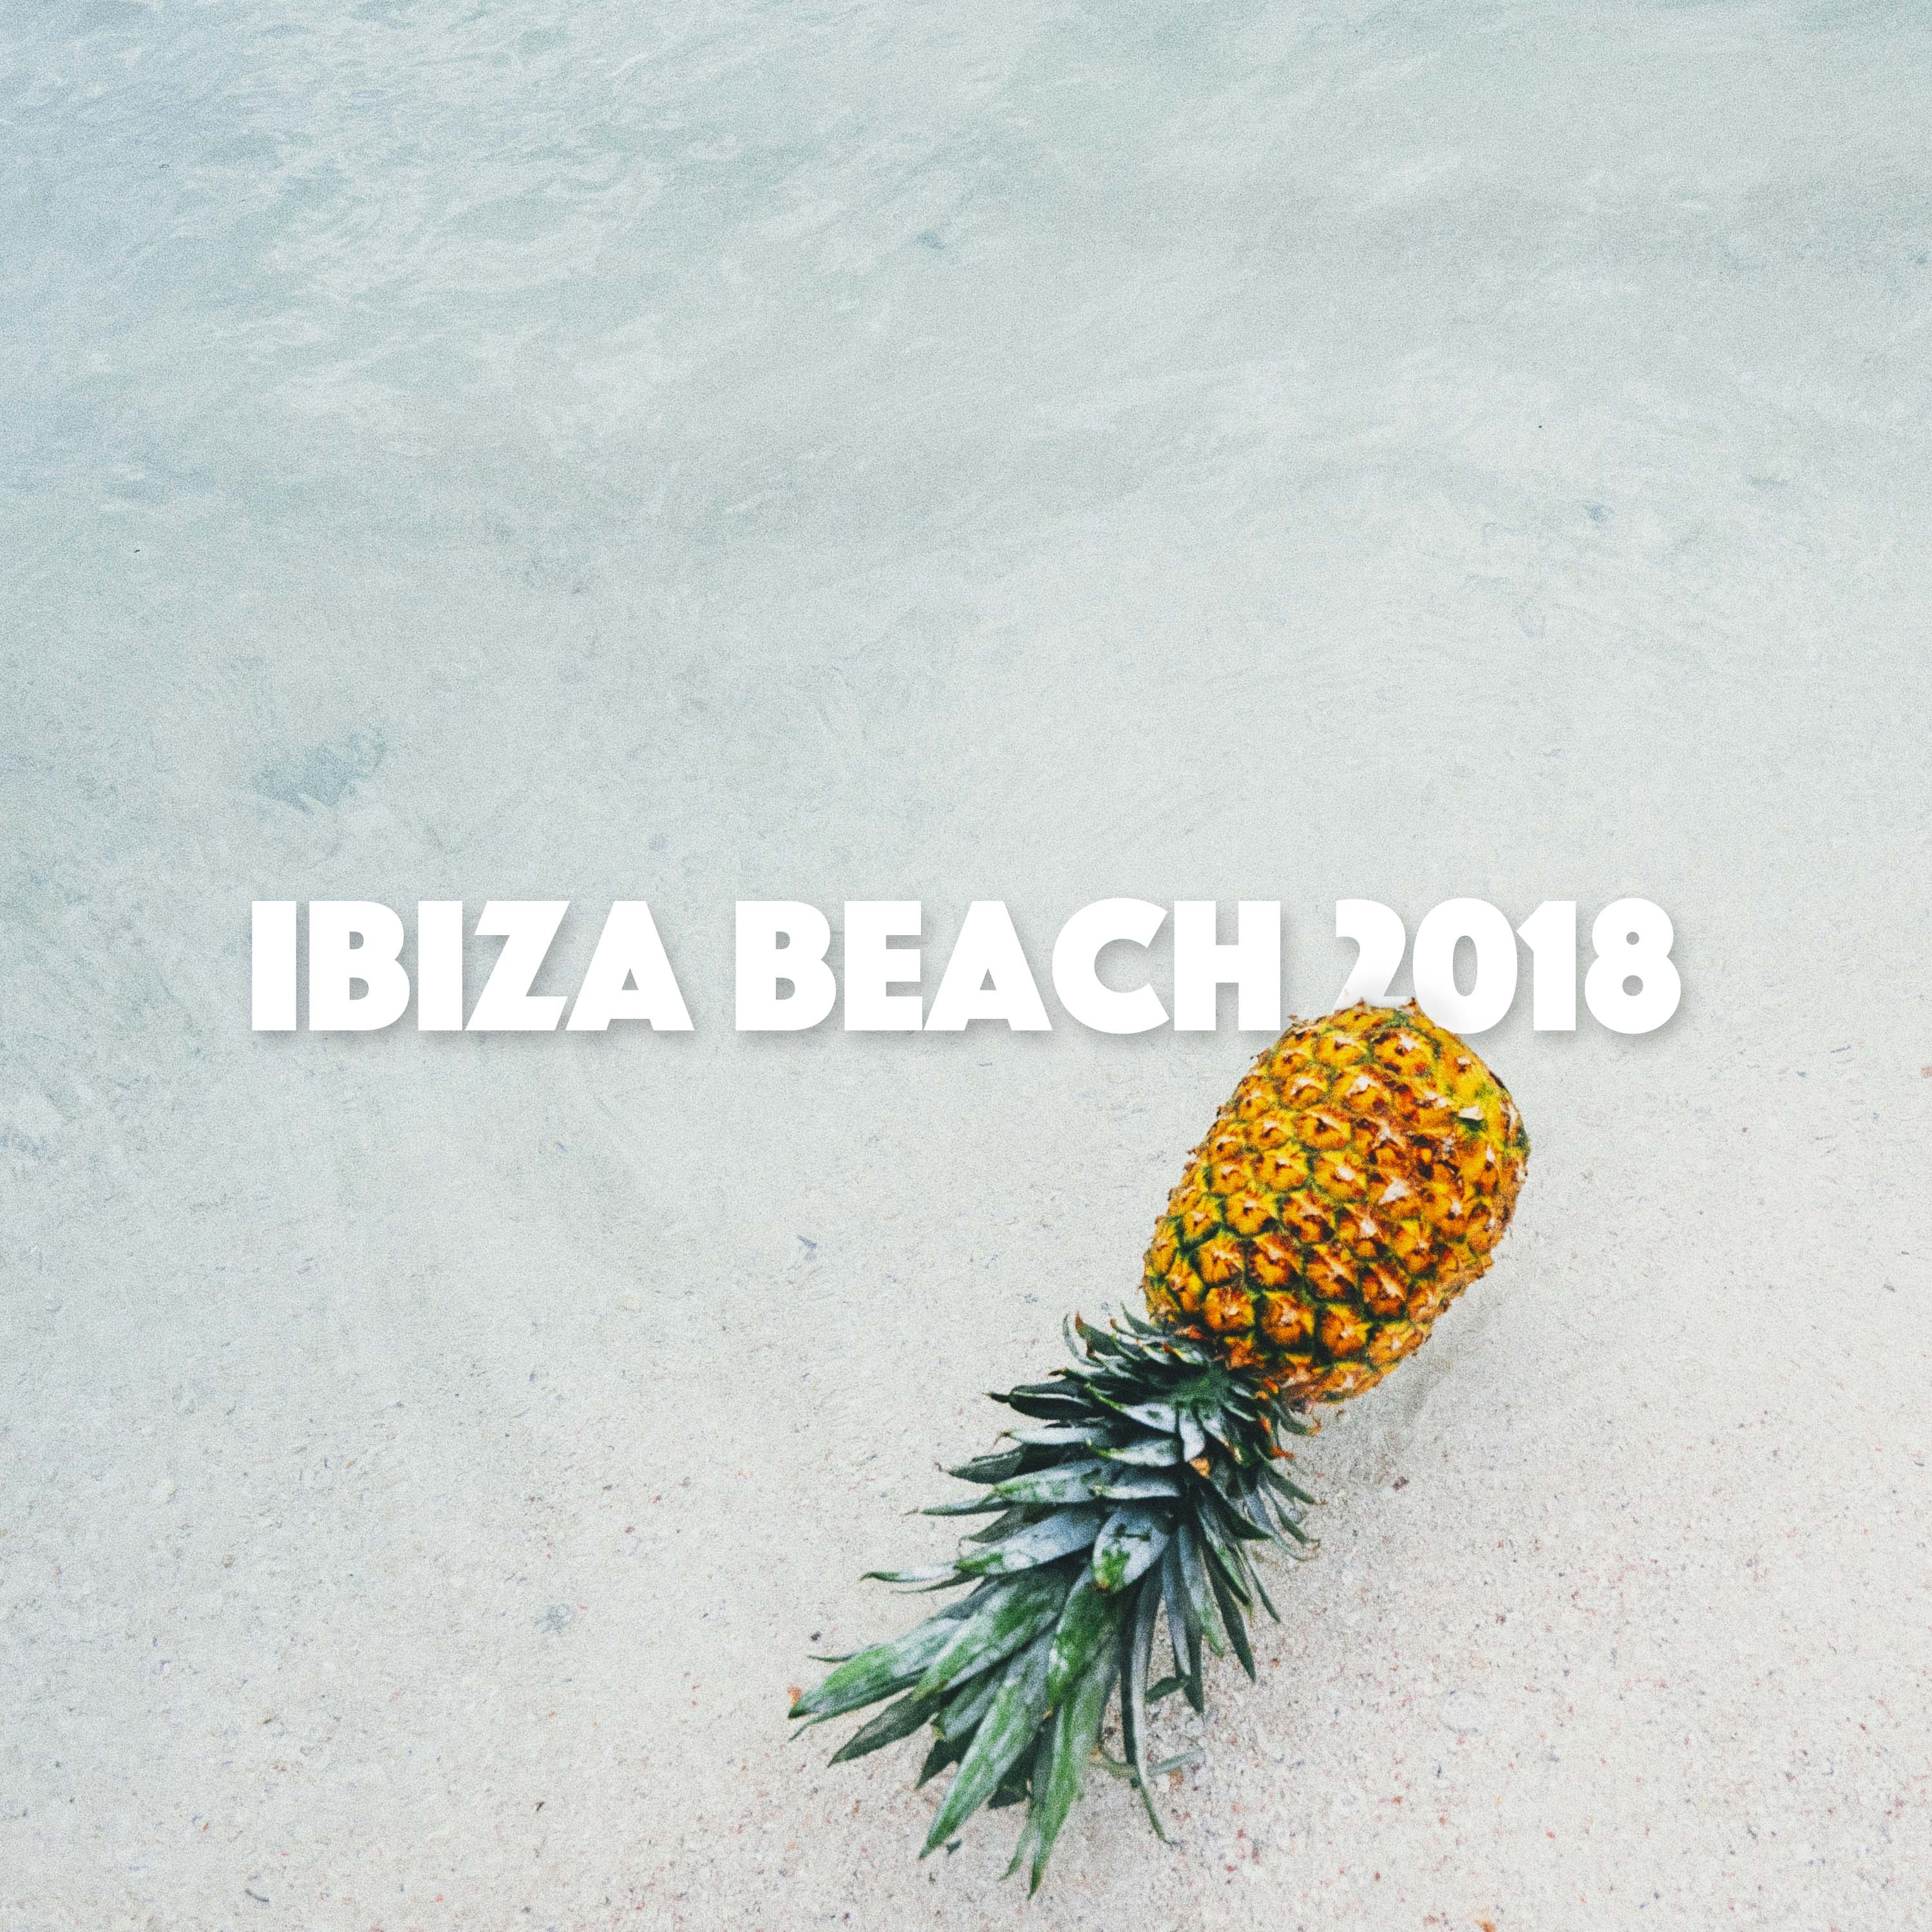 Ibiza Beach 2018 - Best Instrumental Lounge CD for Summer Beach and Chillout Party